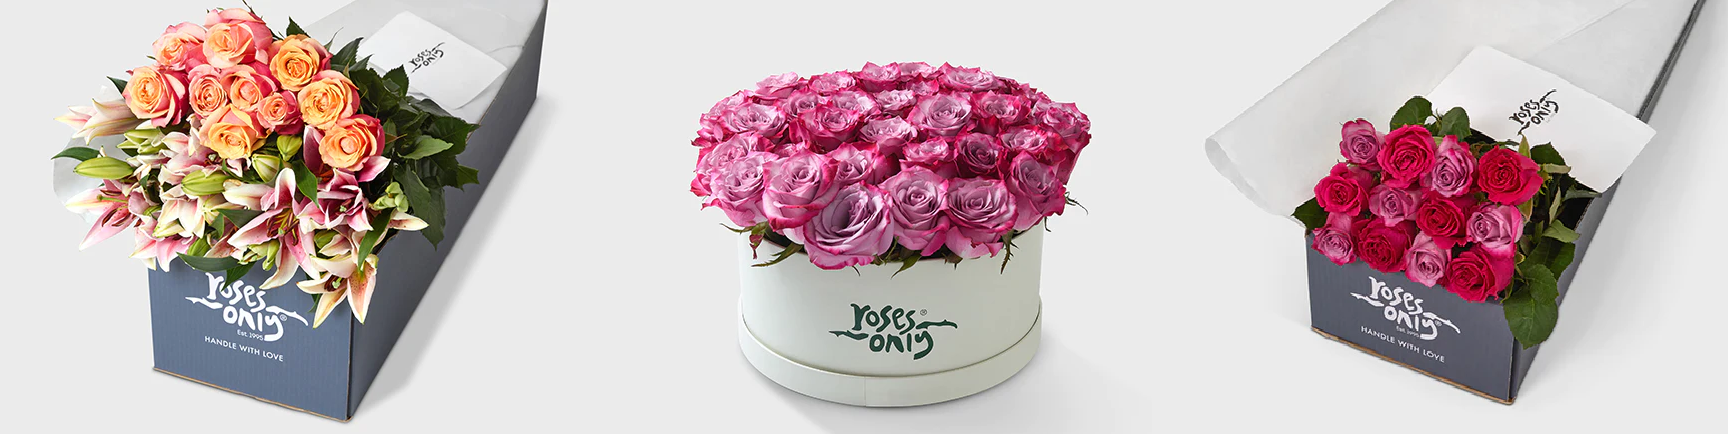 Roses Only Florist Promo Singapore